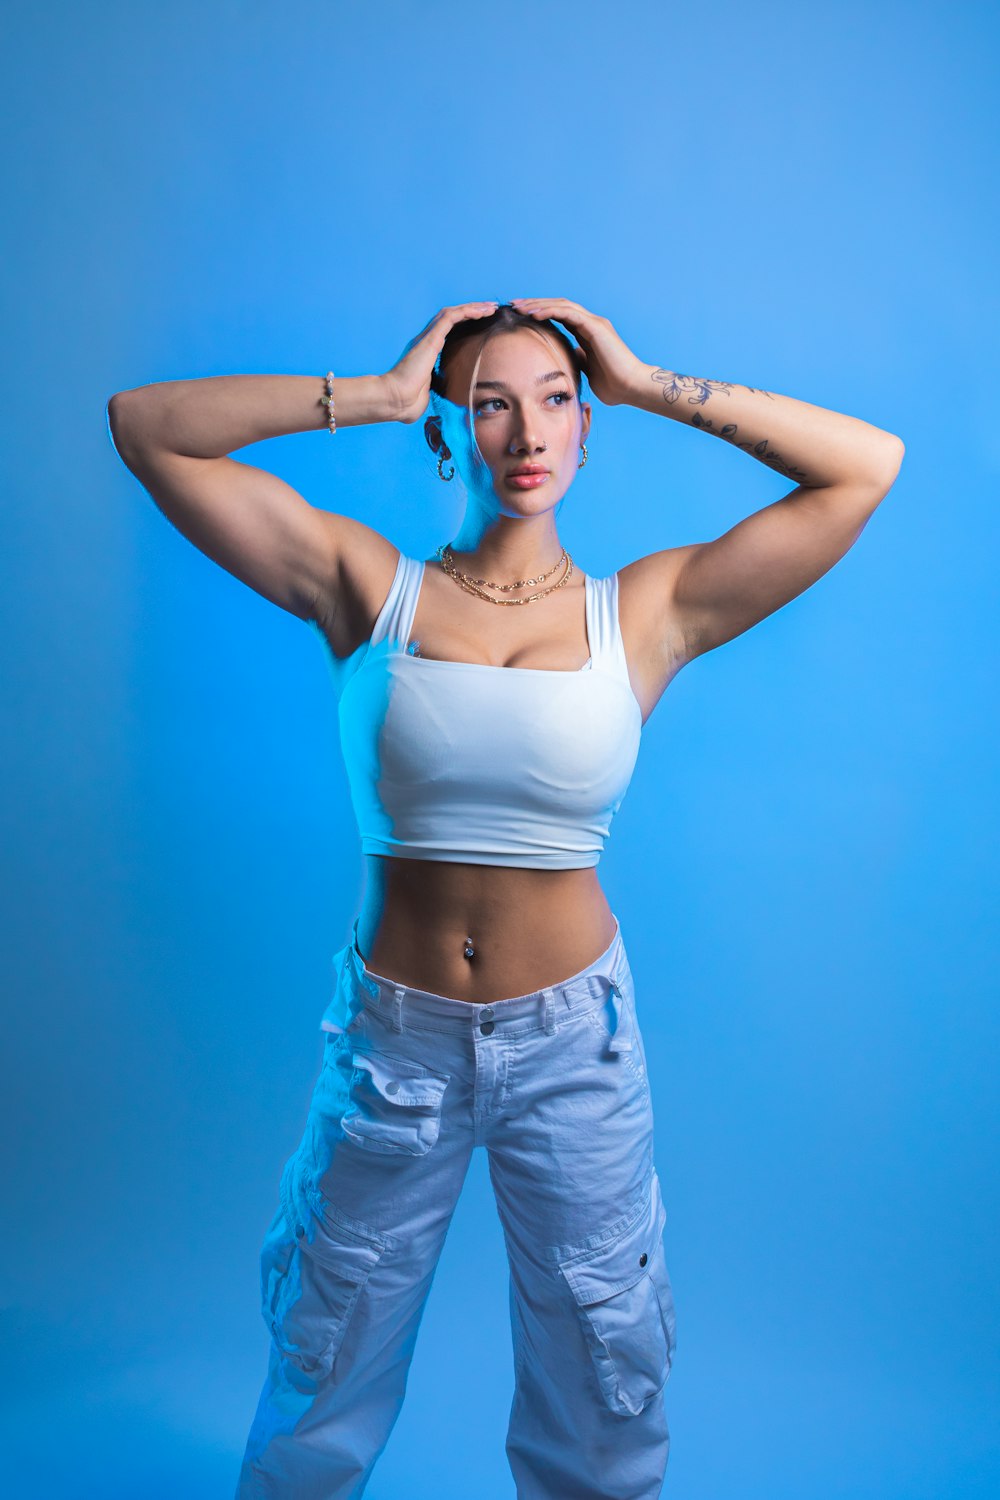 a woman in white top and blue pants posing for a picture